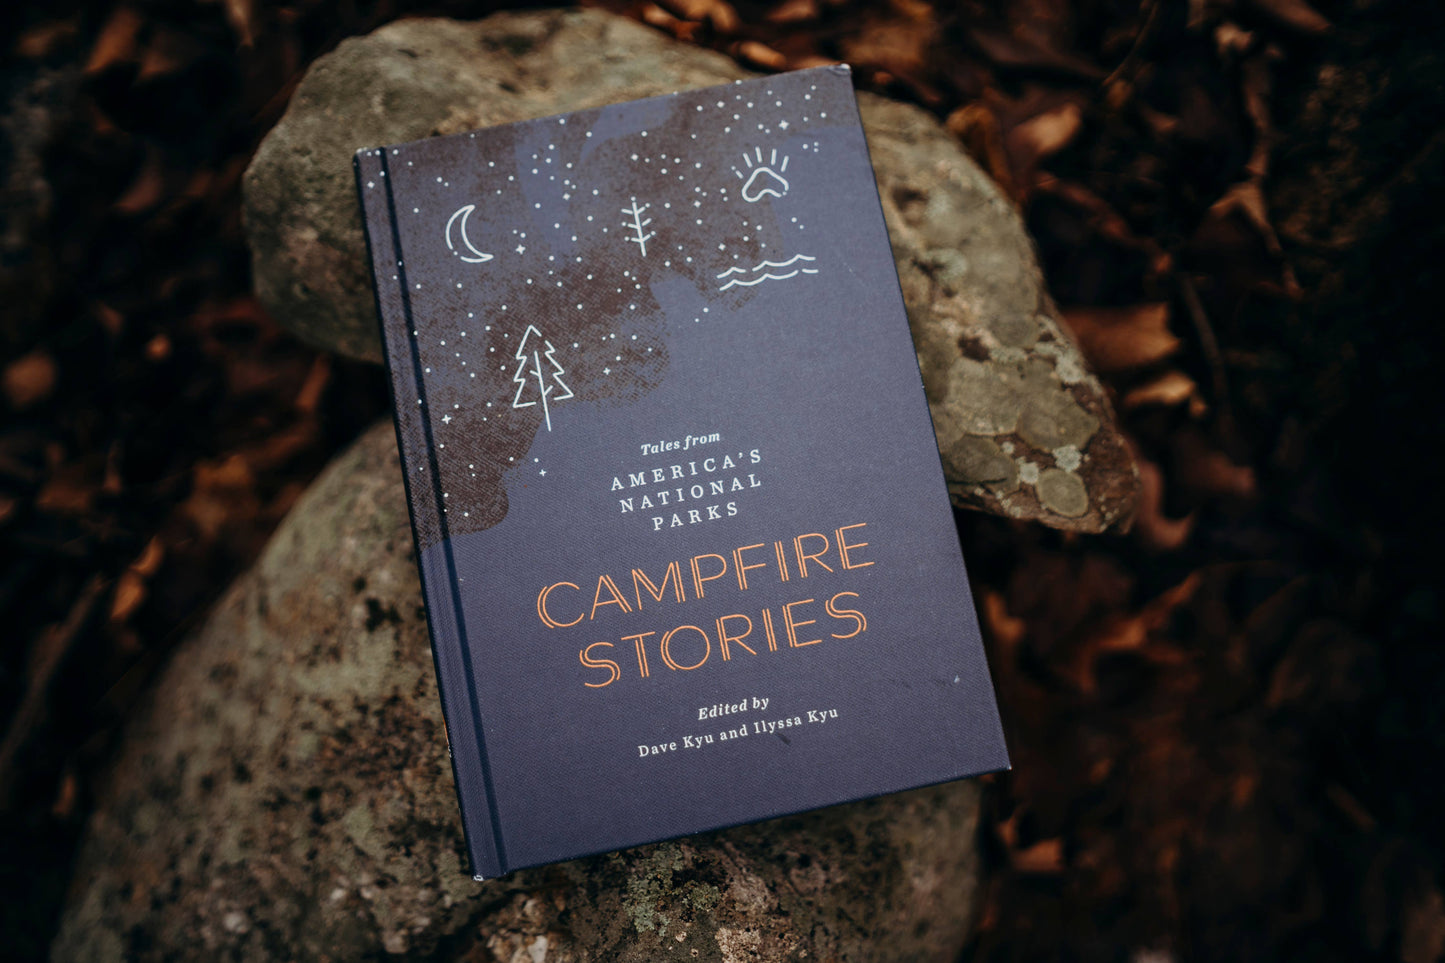 Campfire Stories: Tales from America's National Parks